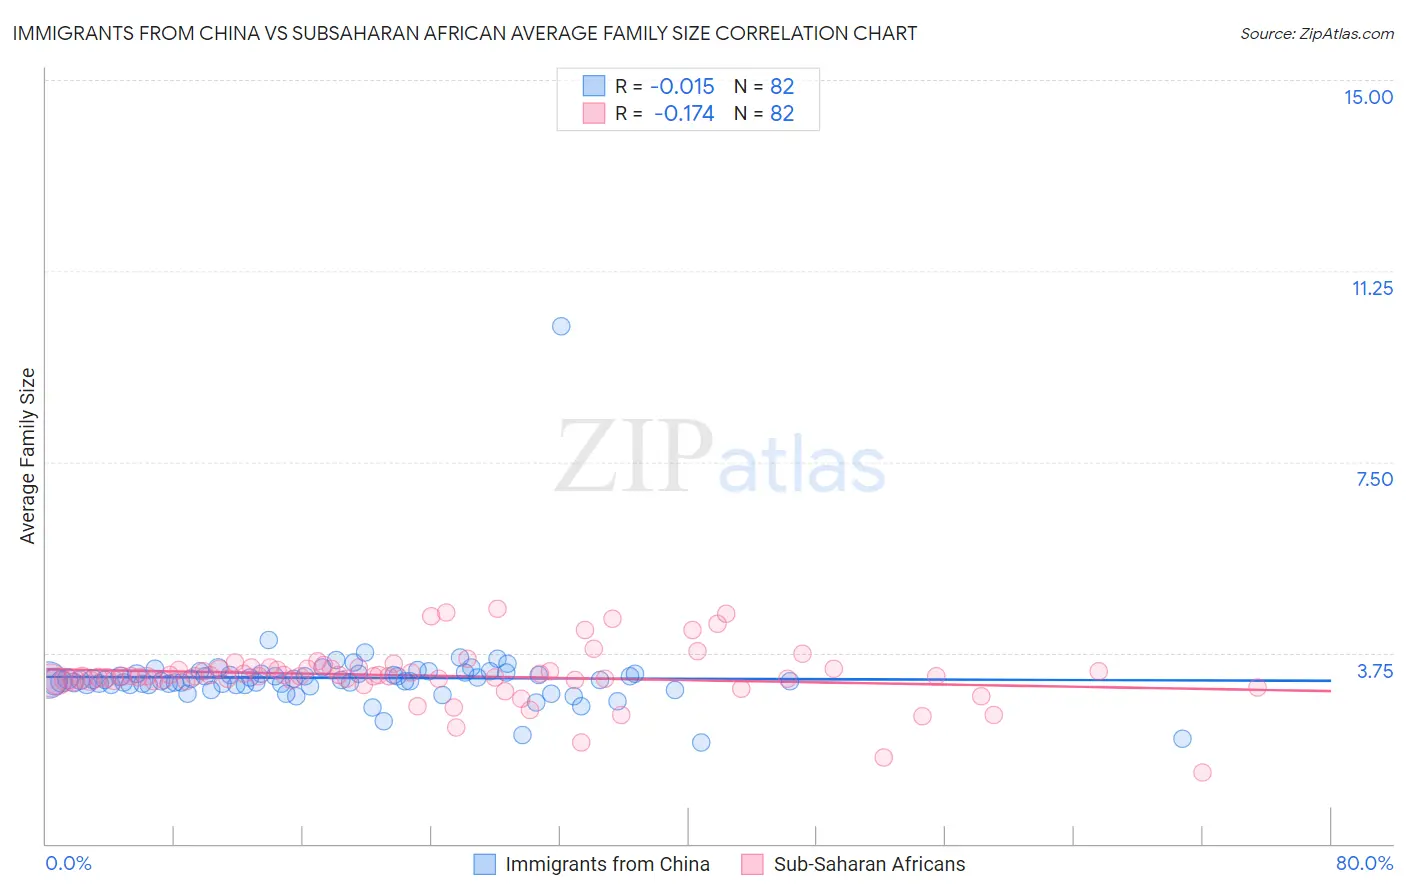 Immigrants from China vs Subsaharan African Average Family Size